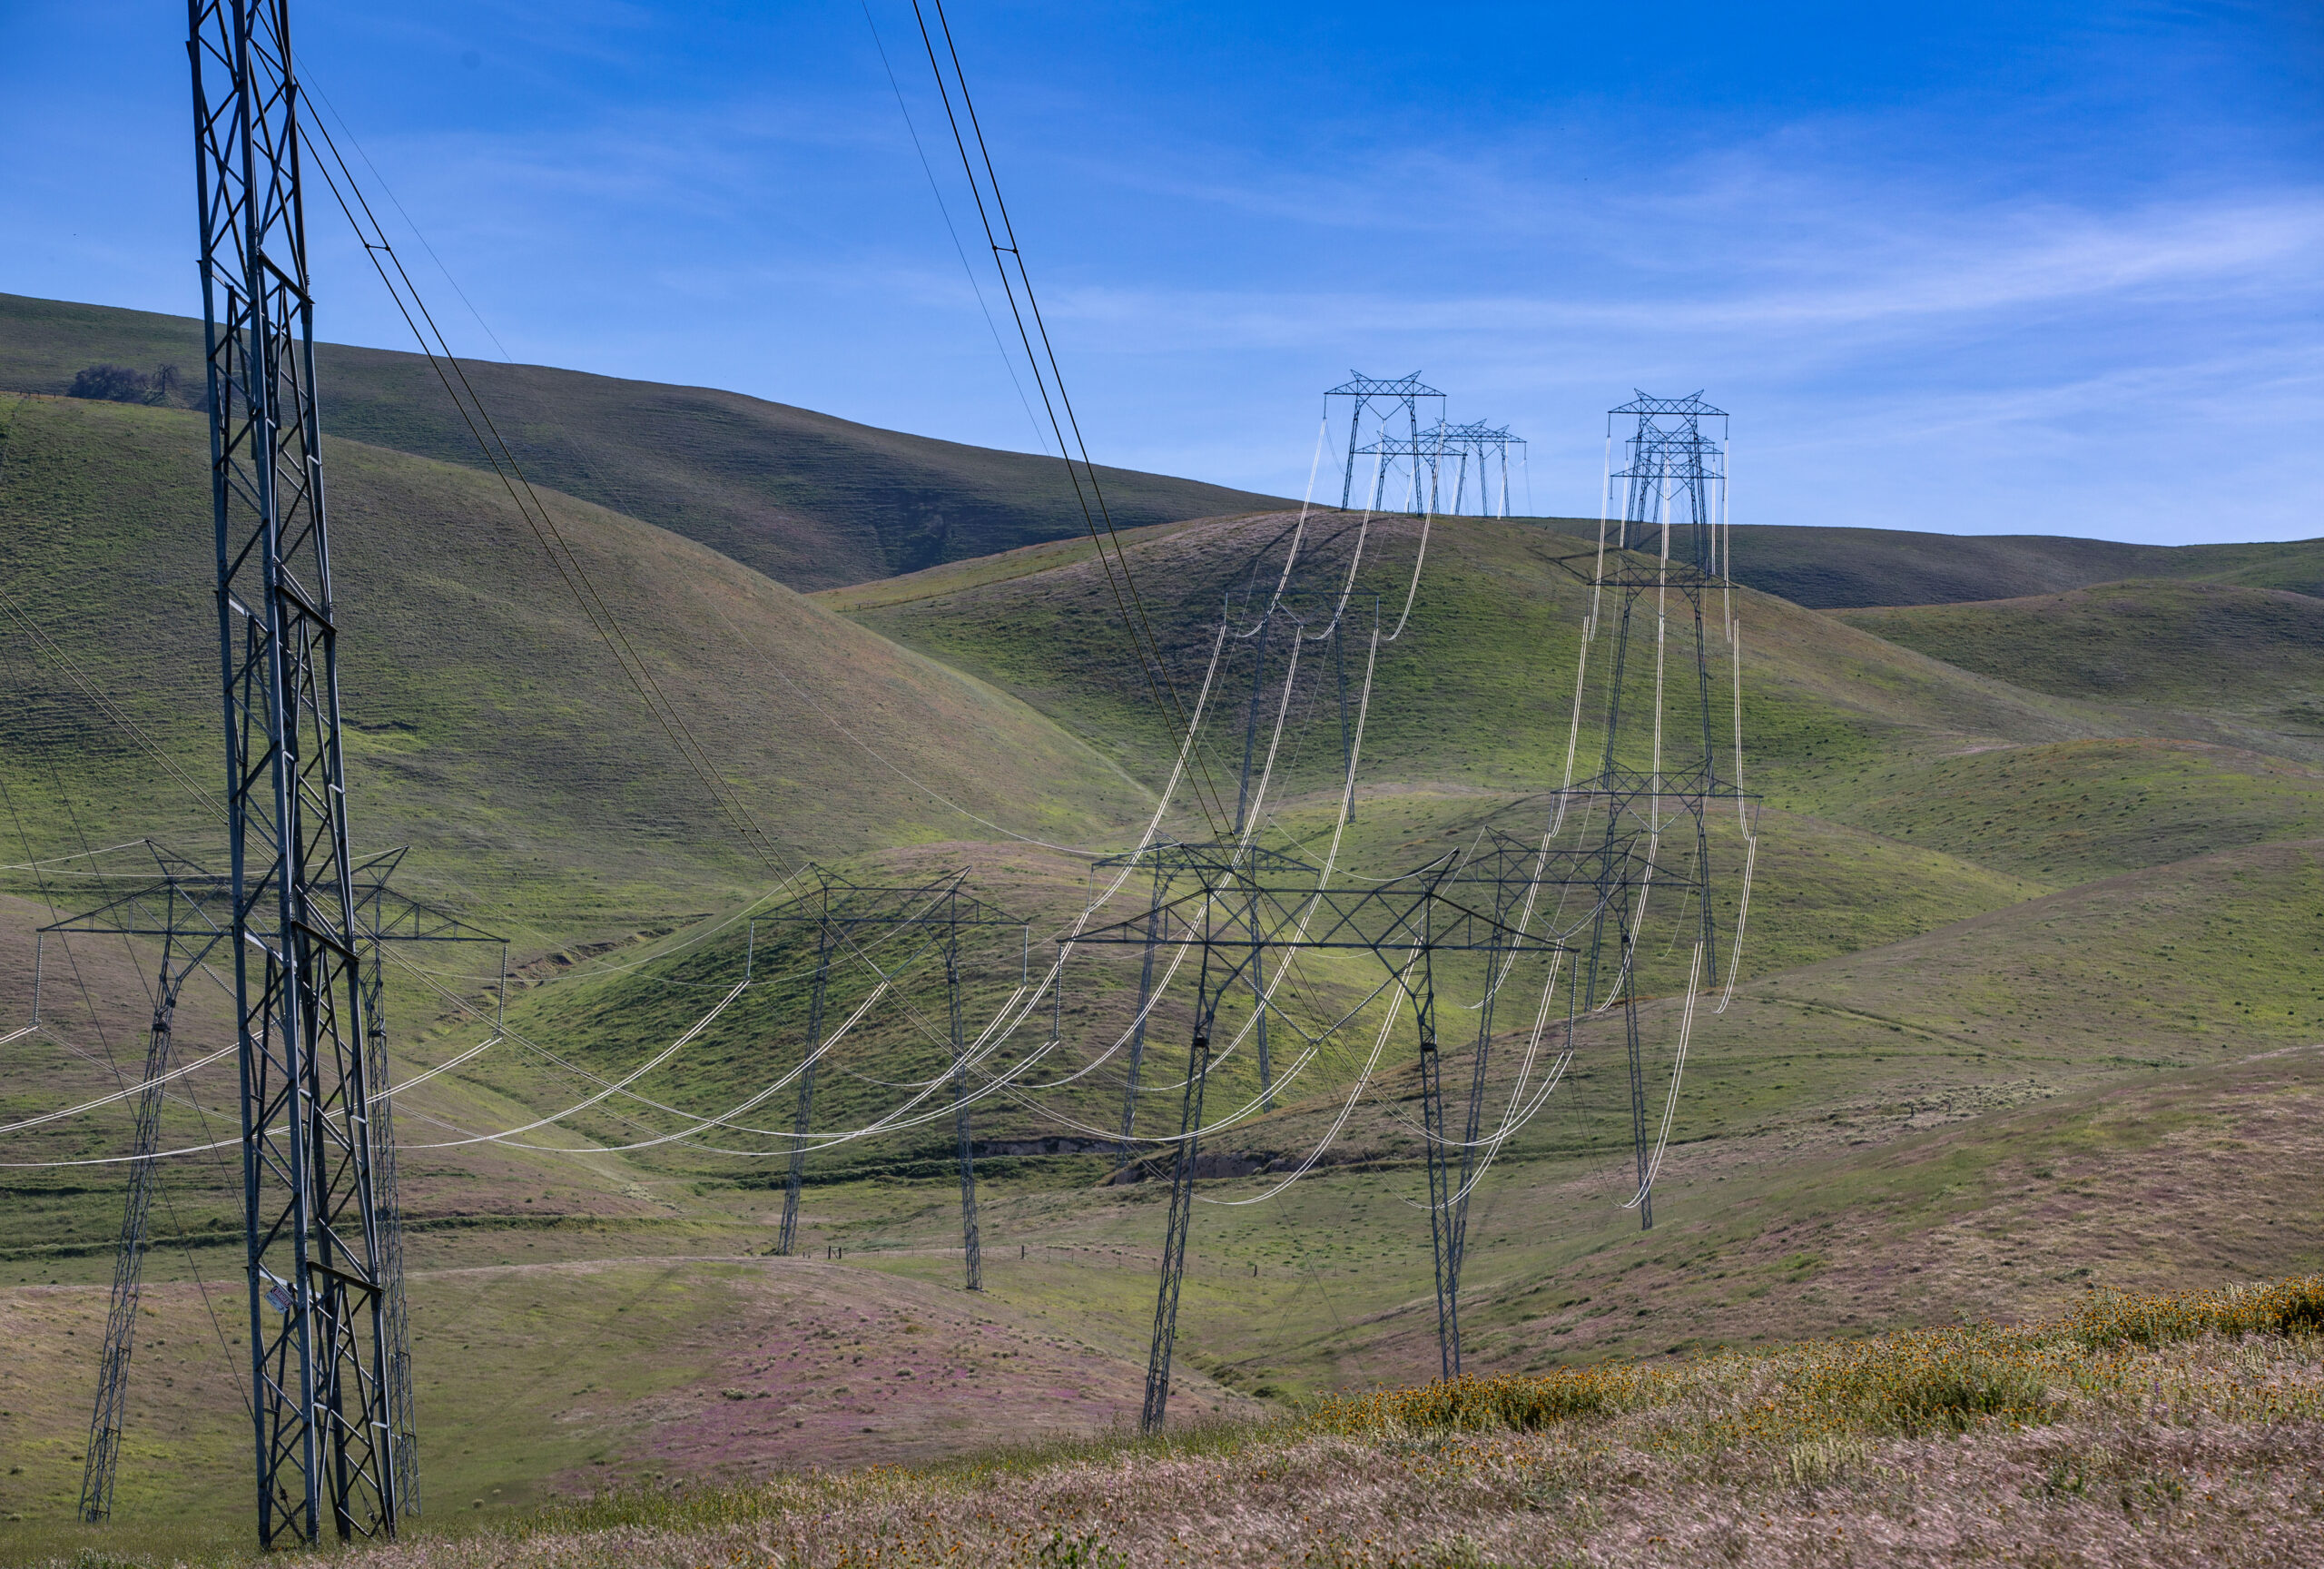 In McKittrick, California, high power electrical transmission lines reach over the mountains from the solar farms in California City to the Central Valley. Credit: George Rose/Getty Images.